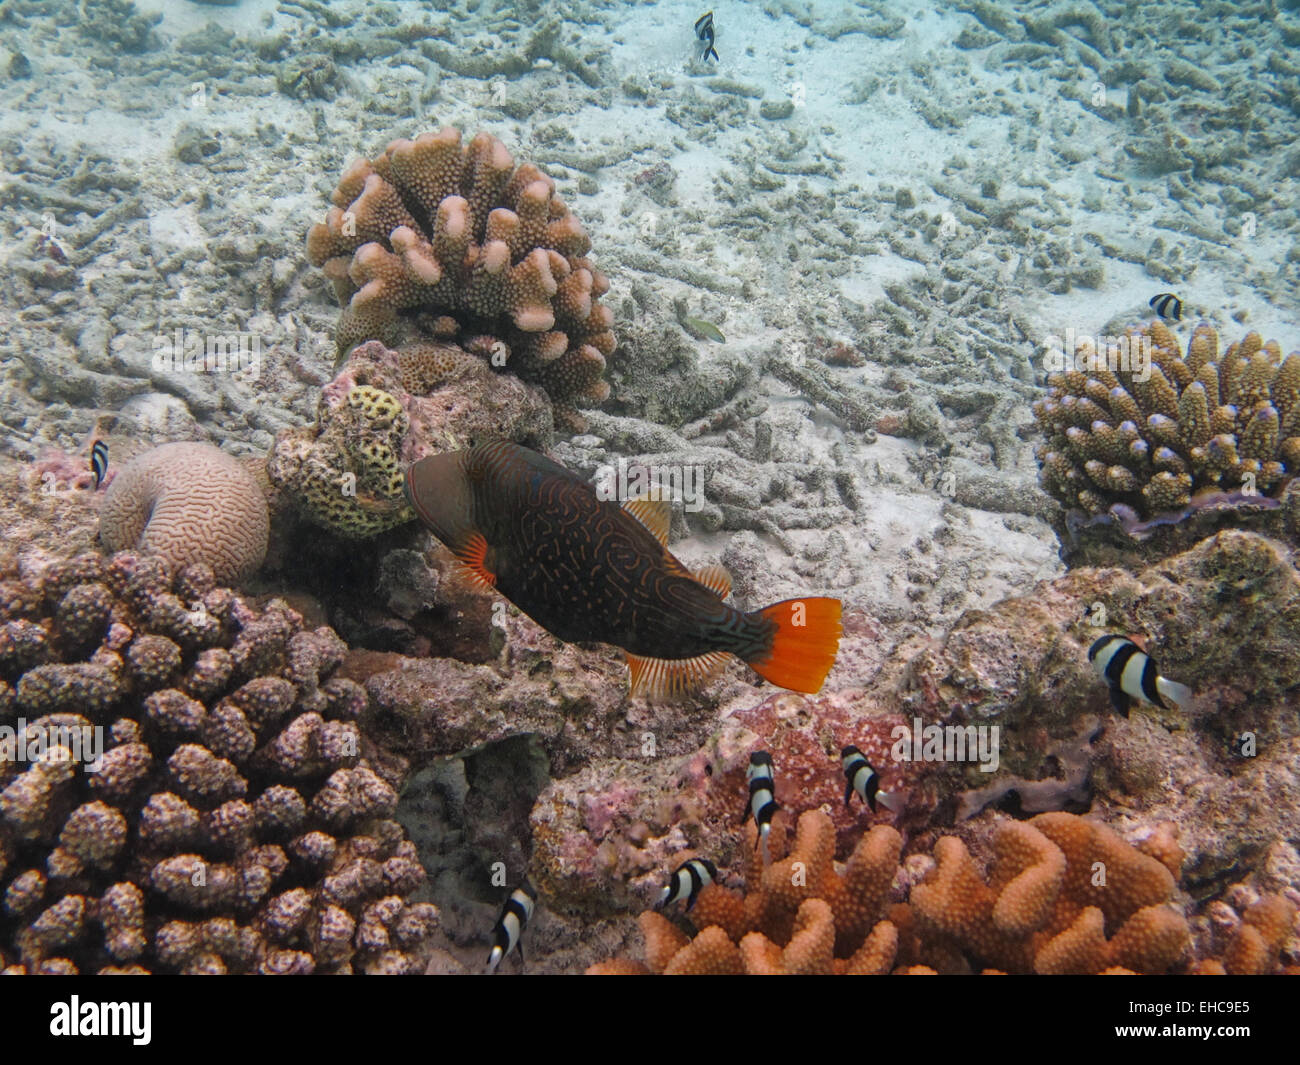 An Orange stripe Trigger fish and a shoal of Humbug  or Whitetail dascyllus swimming over  Acropora coral  in the Maldives Stock Photo